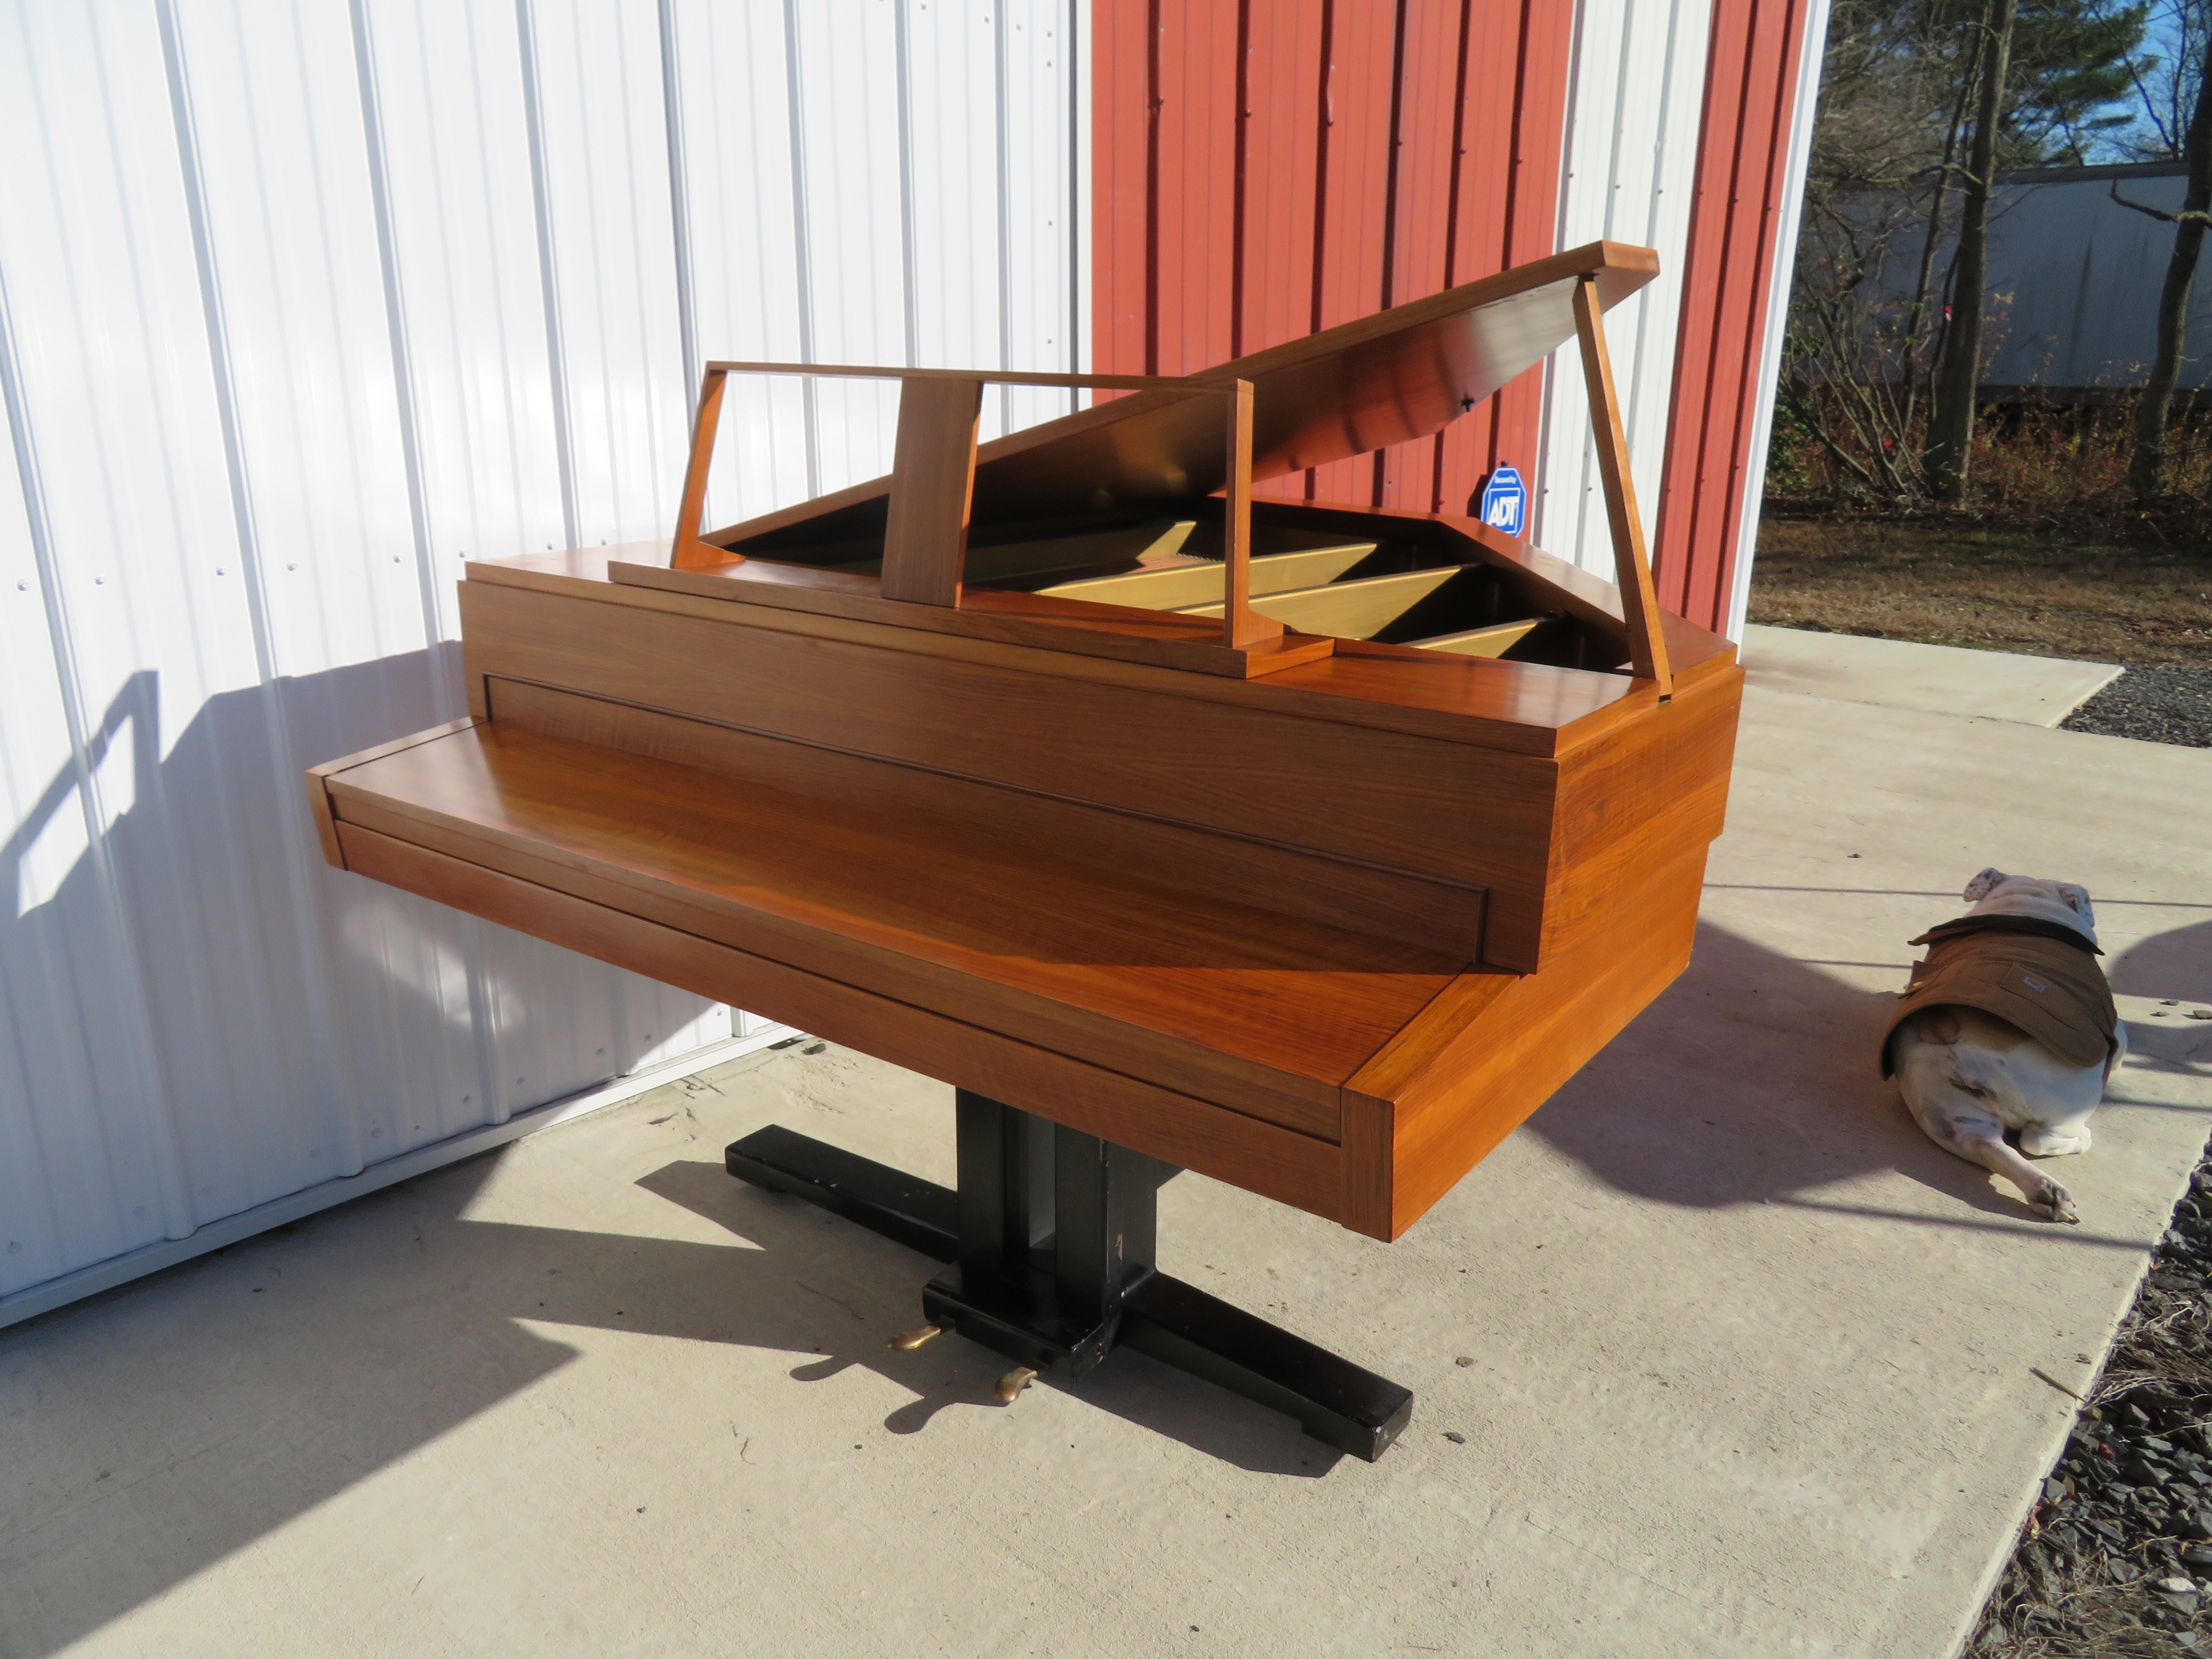 Rippen Pianos of the Netherlands were well respected for their high-quality instruments of unique designs and materials. Nico Rippen designed this folding piano as a design that could be shipped for less cost and moved into smaller homes. The pianos